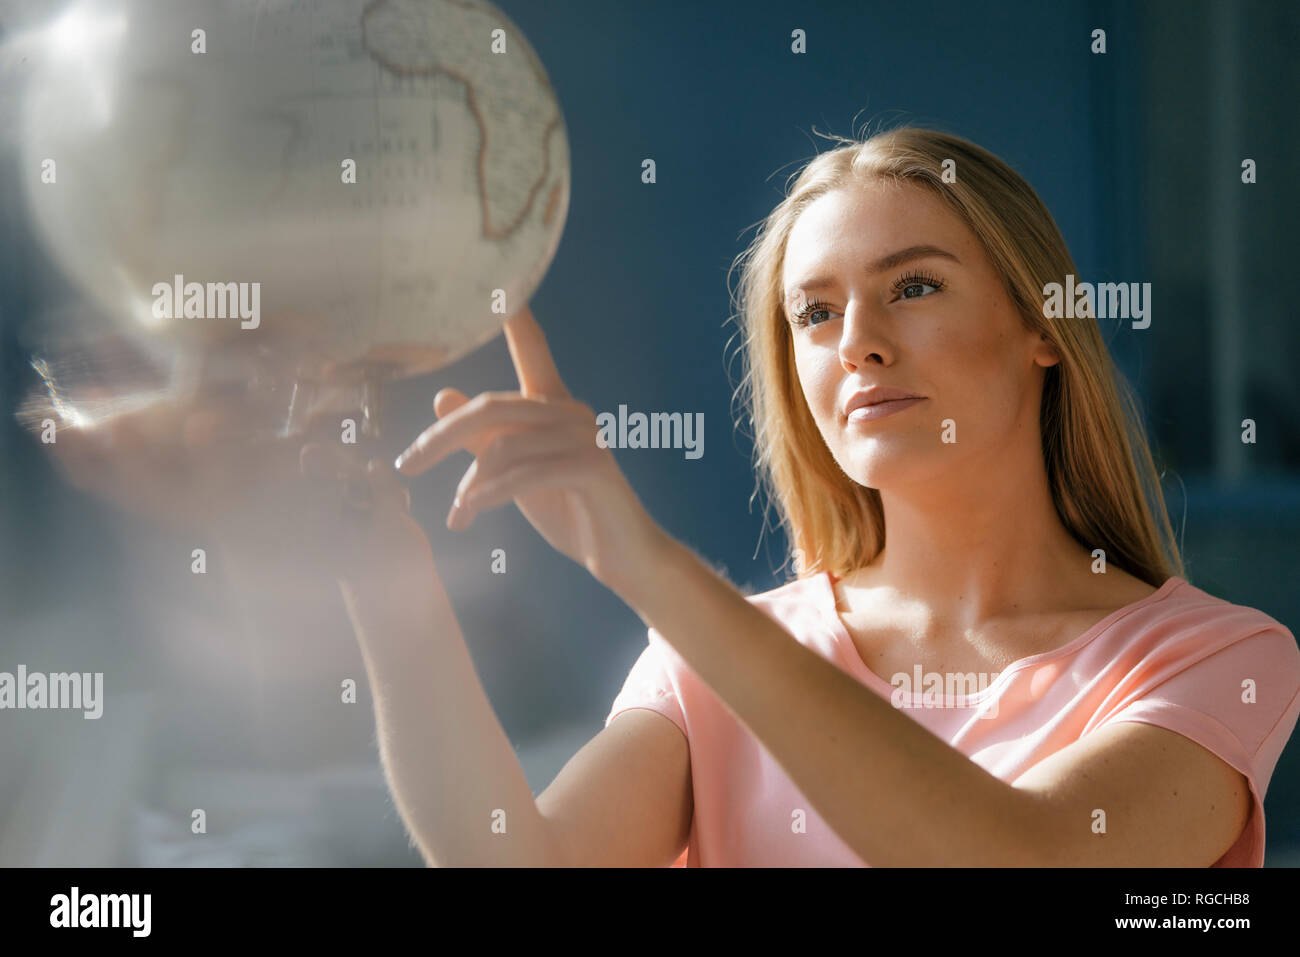 Portrait of young woman looking and pointing at globe Stock Photo